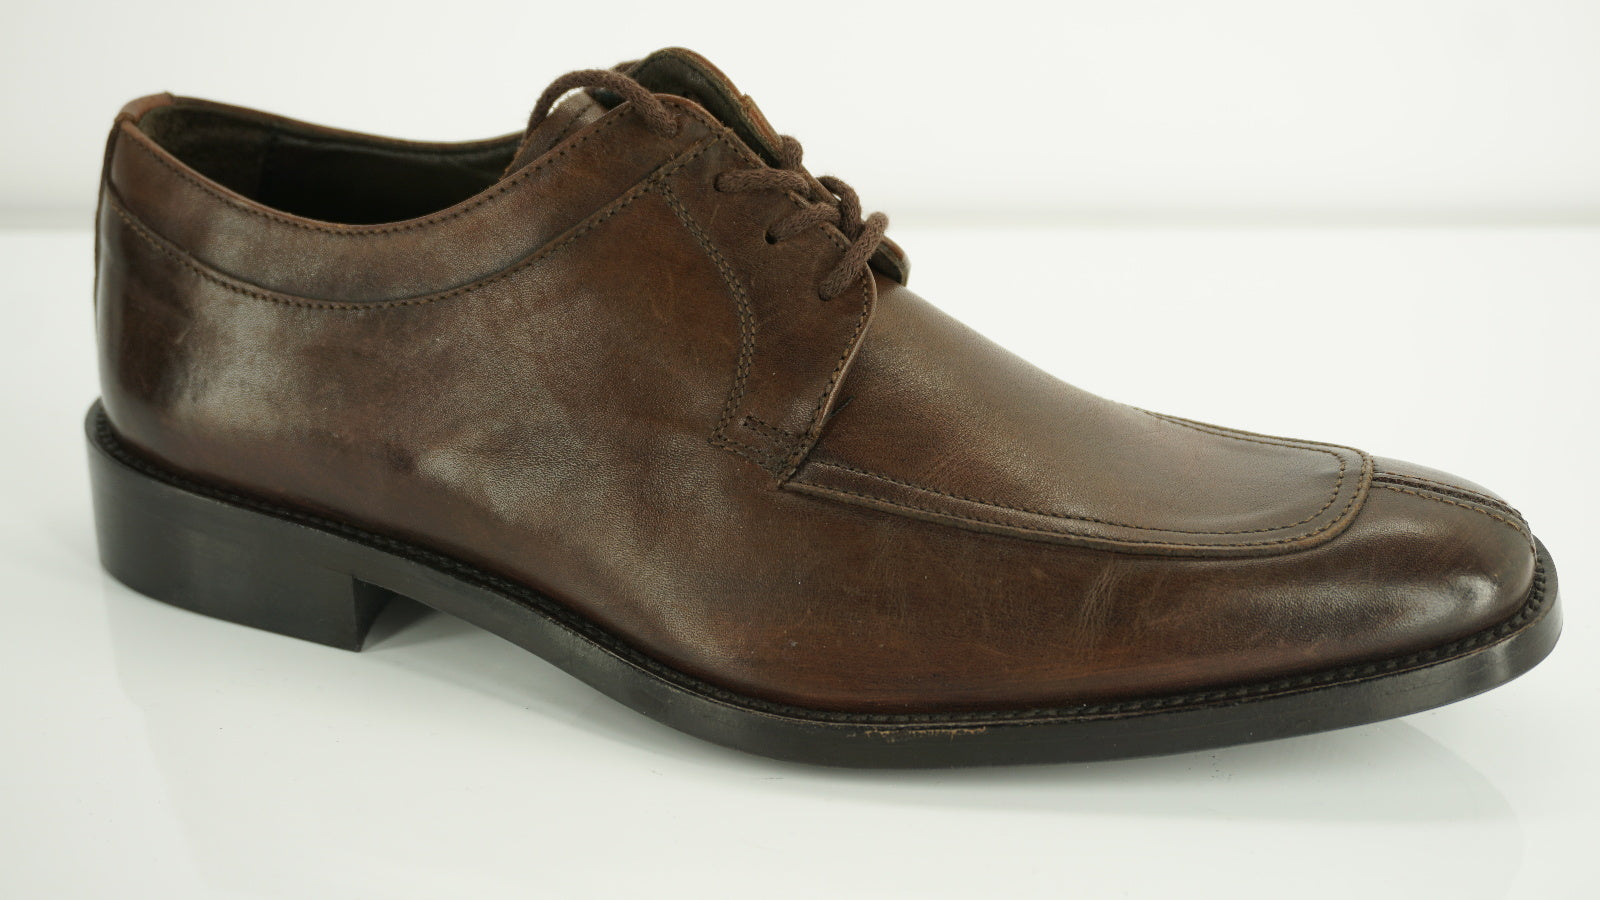 To Boot New York Dexter Split Toe Derby Oxford Shoes Size 9.5 M Lace Up $350